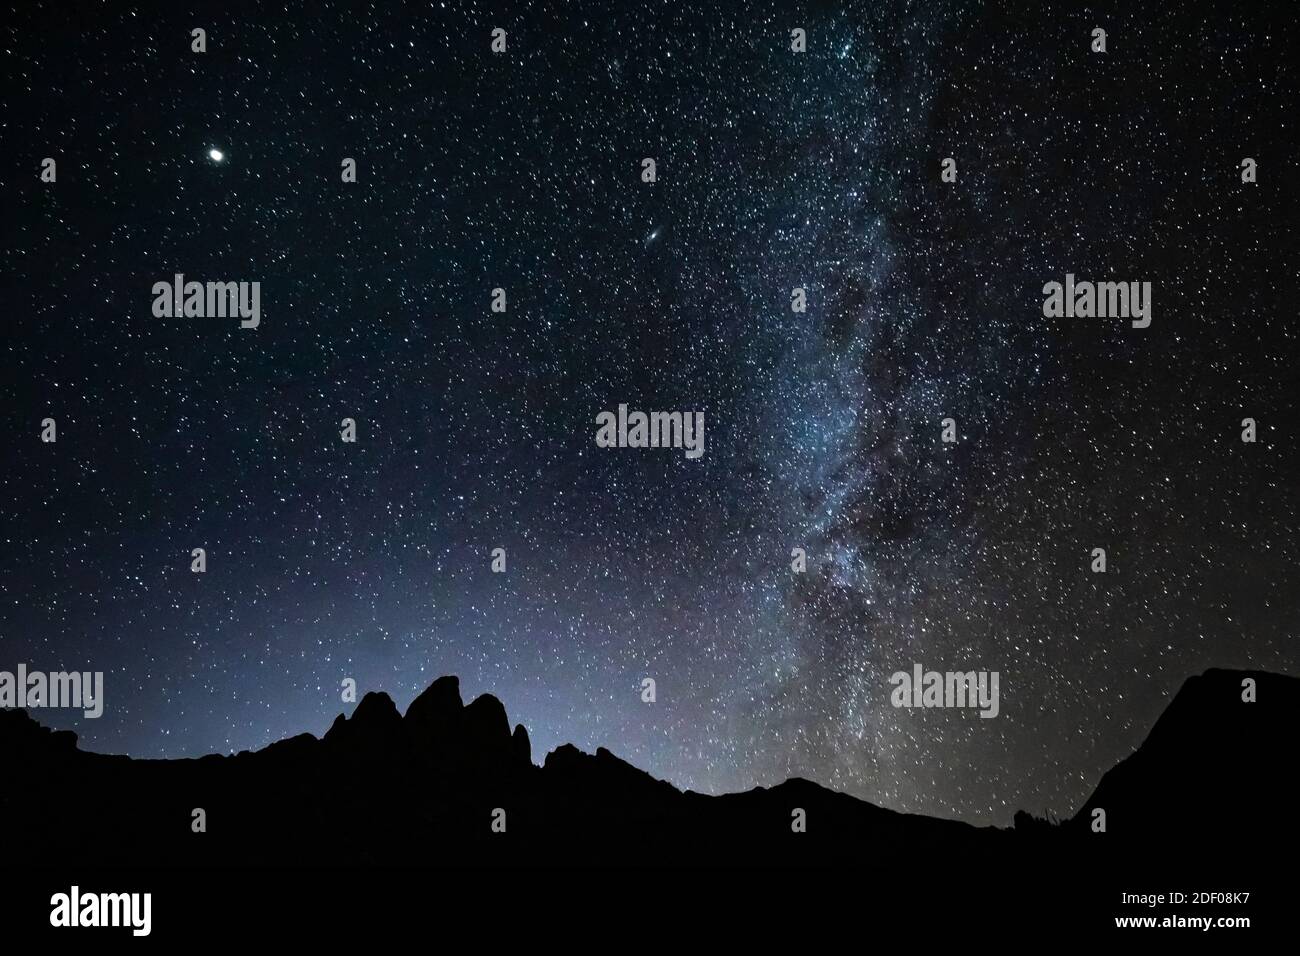 Starry night sky with Milky Way over Rabbit Ears, in the Oragan Mountains viewed from Aguirre Springs Campground, Organ Mountains-Desert Peaks Nationa Stock Photo